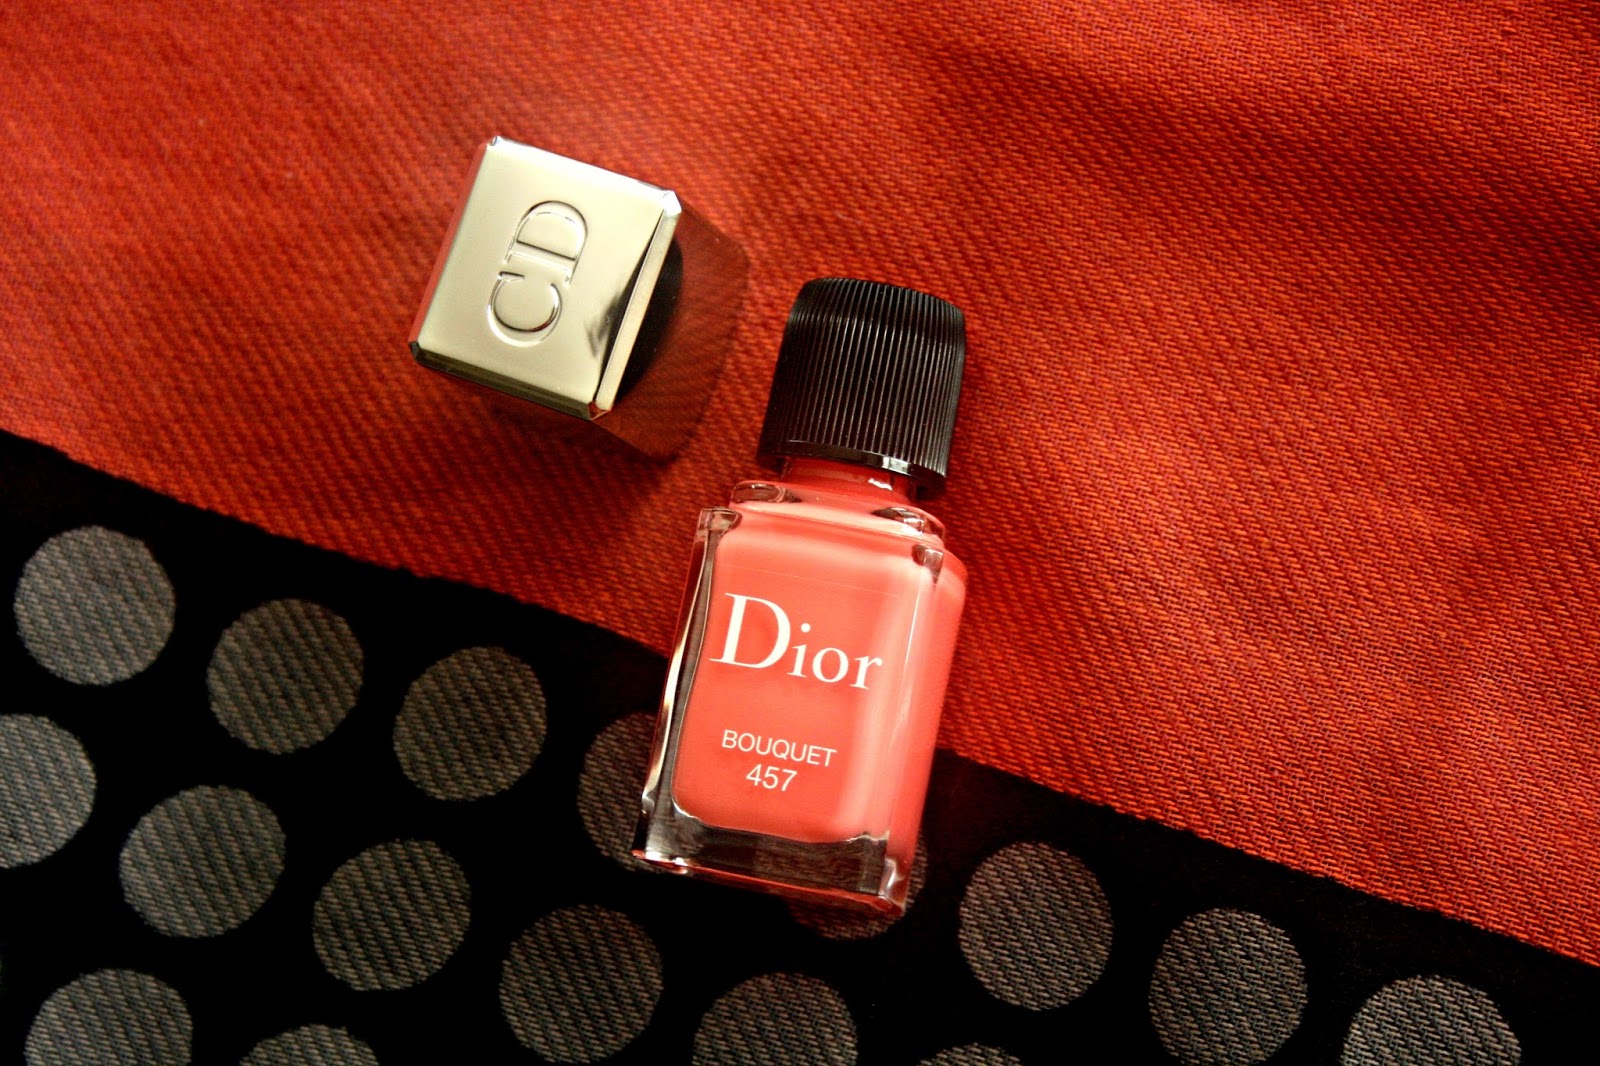 DIOR Vernis #457 Bouquet Trianon Spring 2014 Edition Review, Photos & Swatches